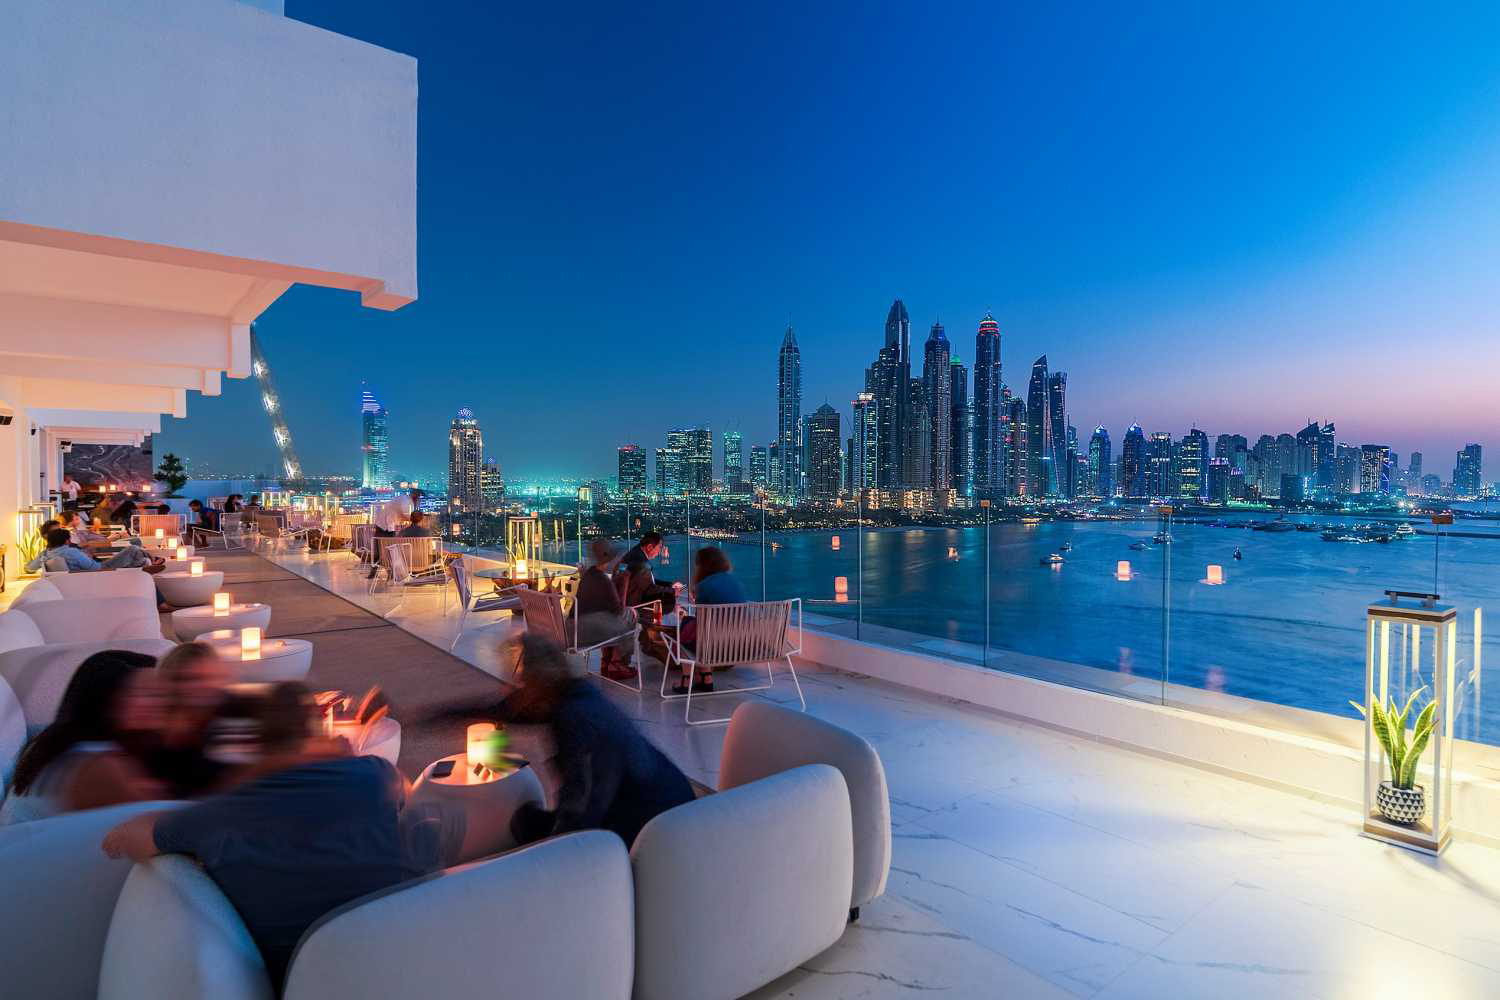 Dubai happy hours 2020: Best bar deals, offers and ...